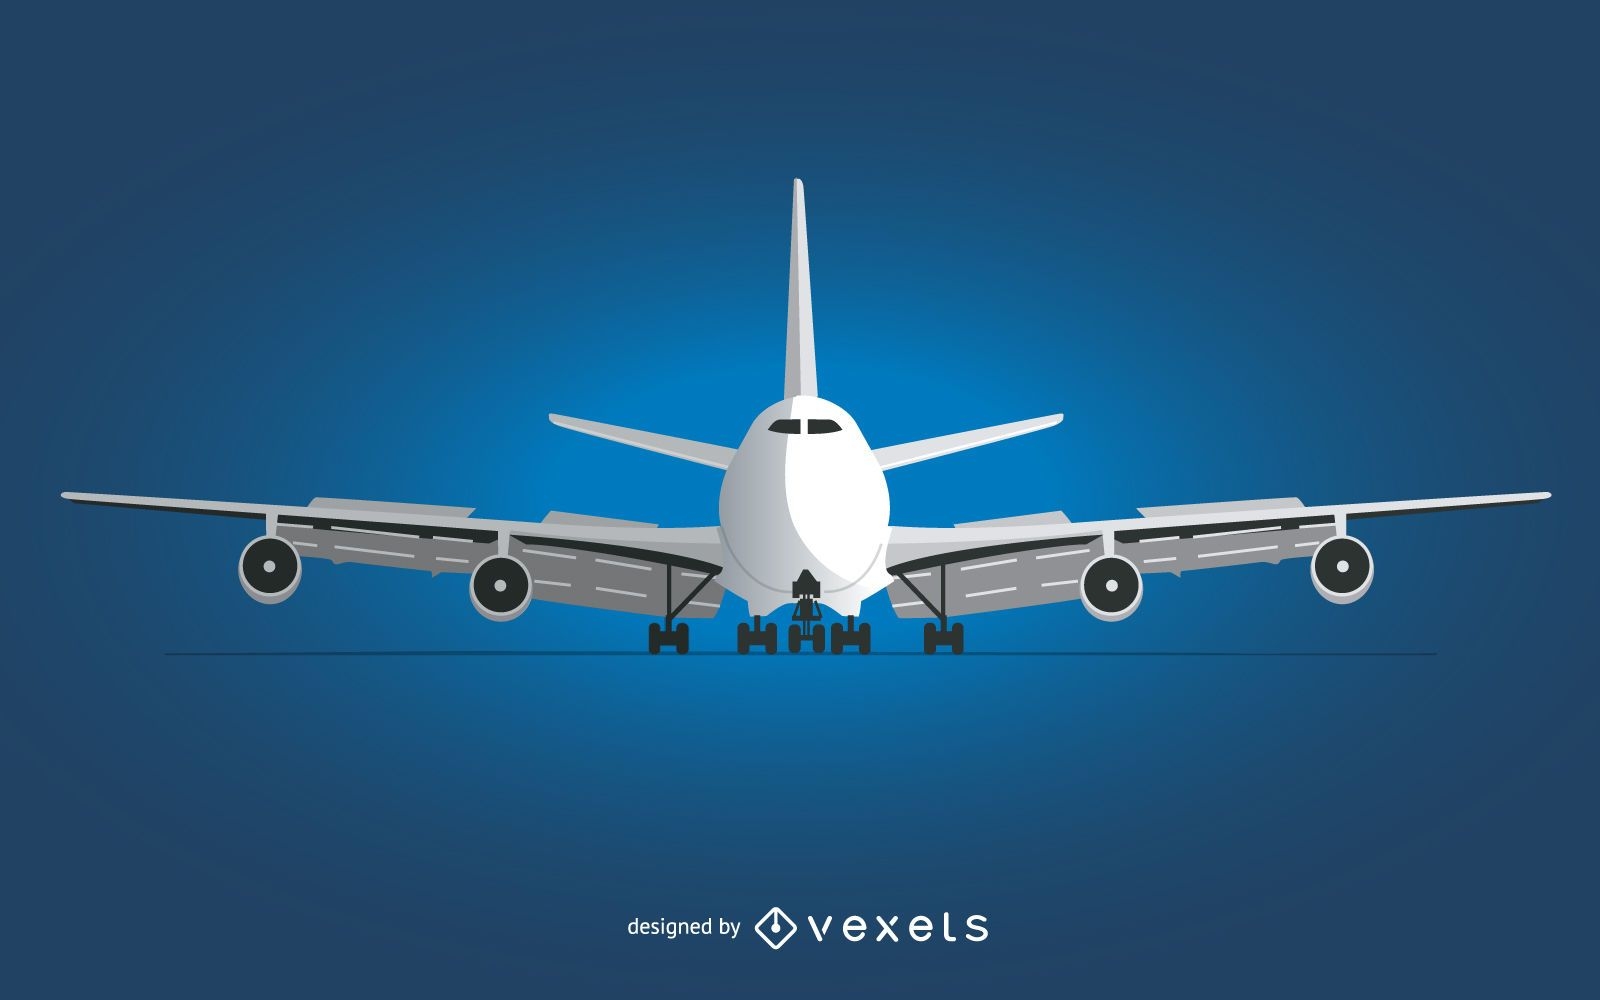 airplane vector front